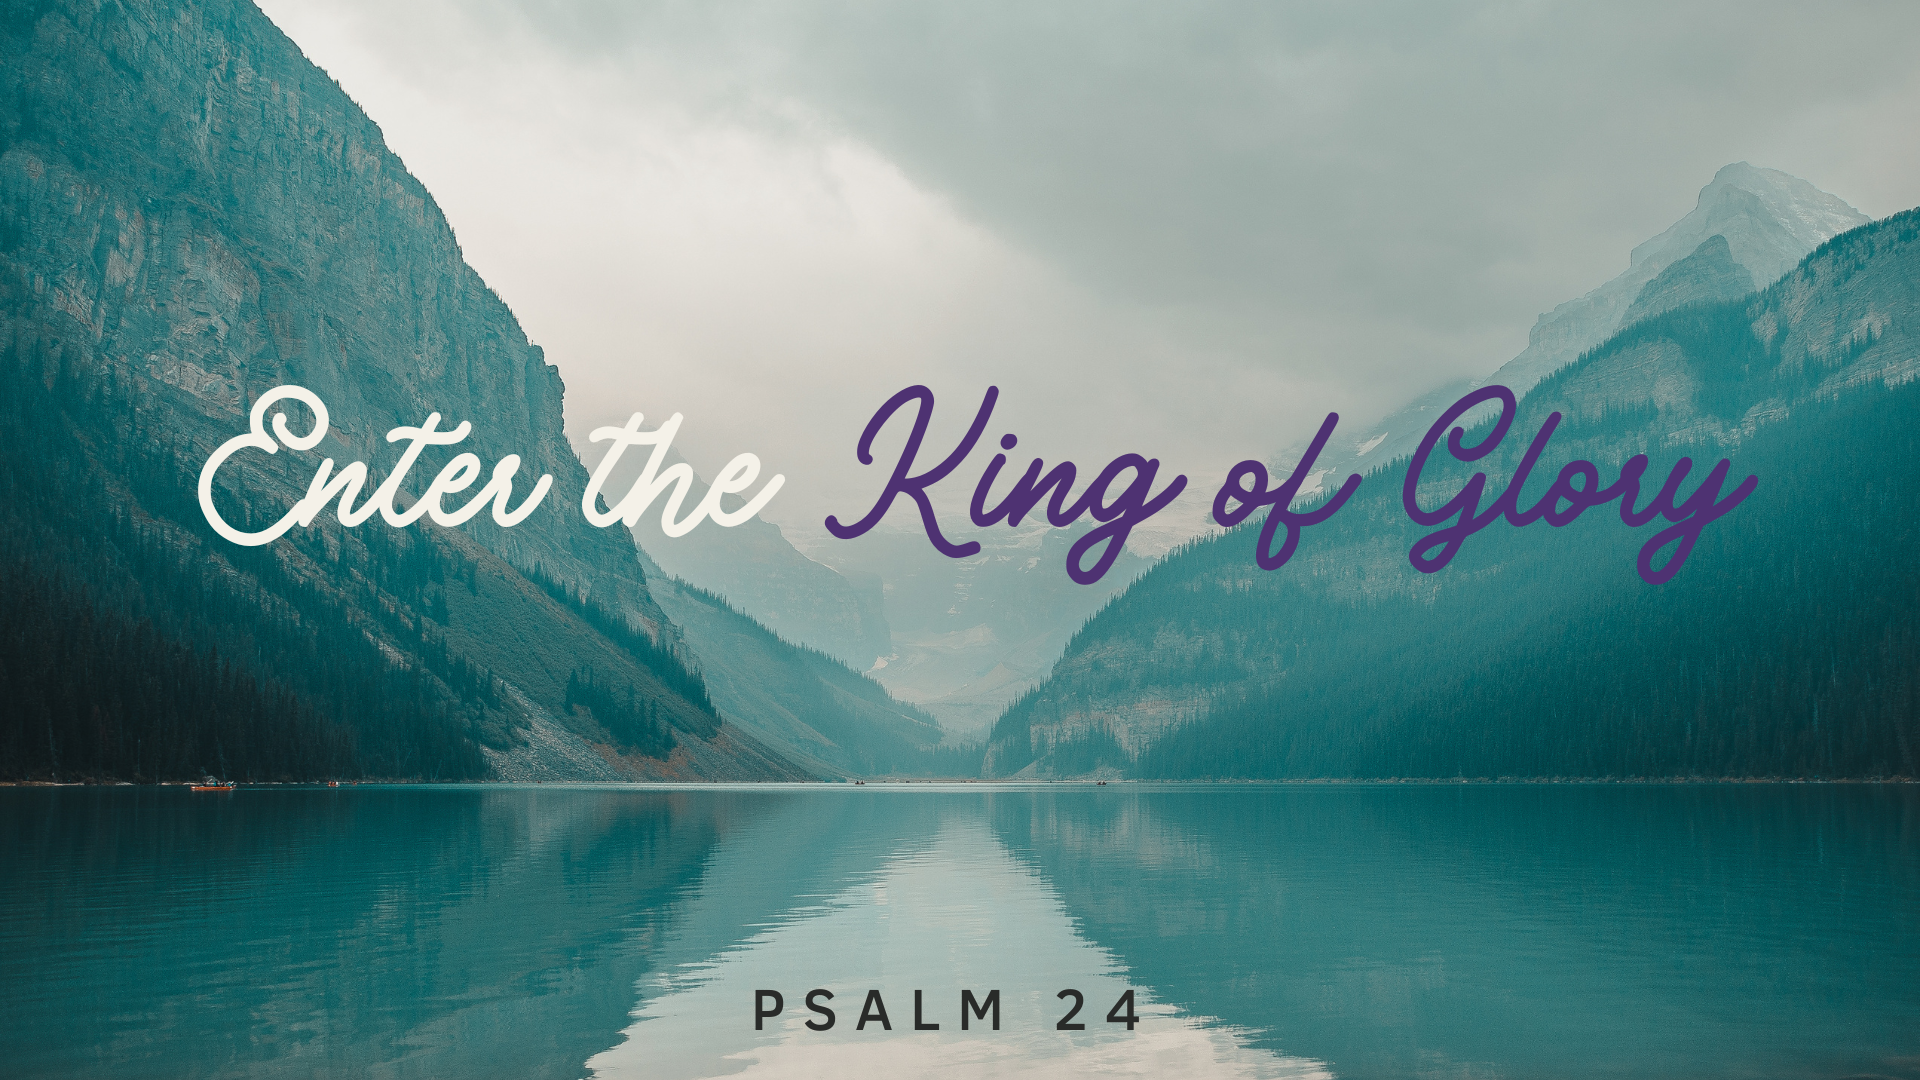 Enter the King of Glory